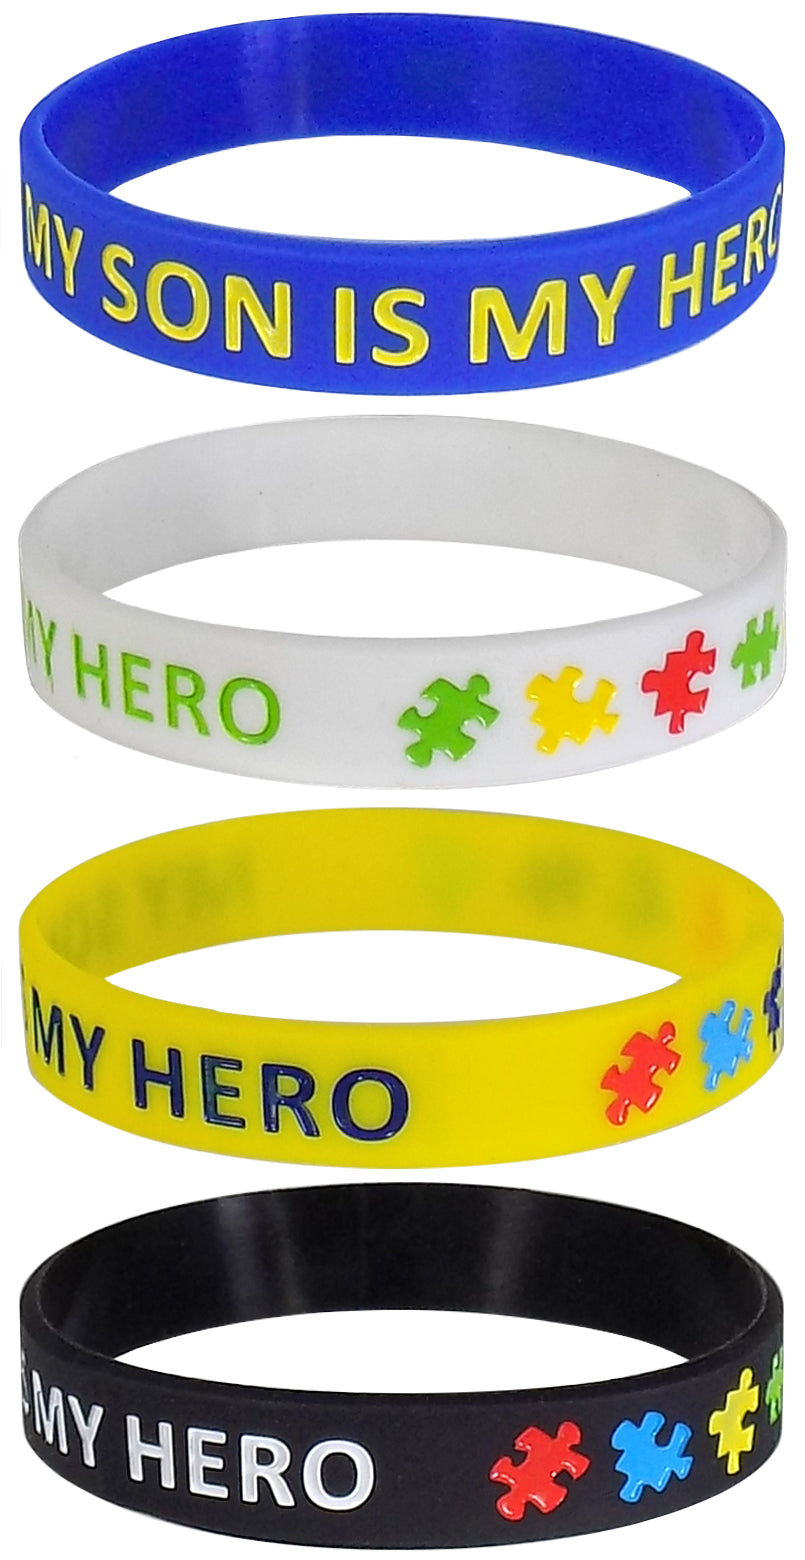 My Son is My Hero Autism Support Silicone Bracelet Wristbands (4 Pack)